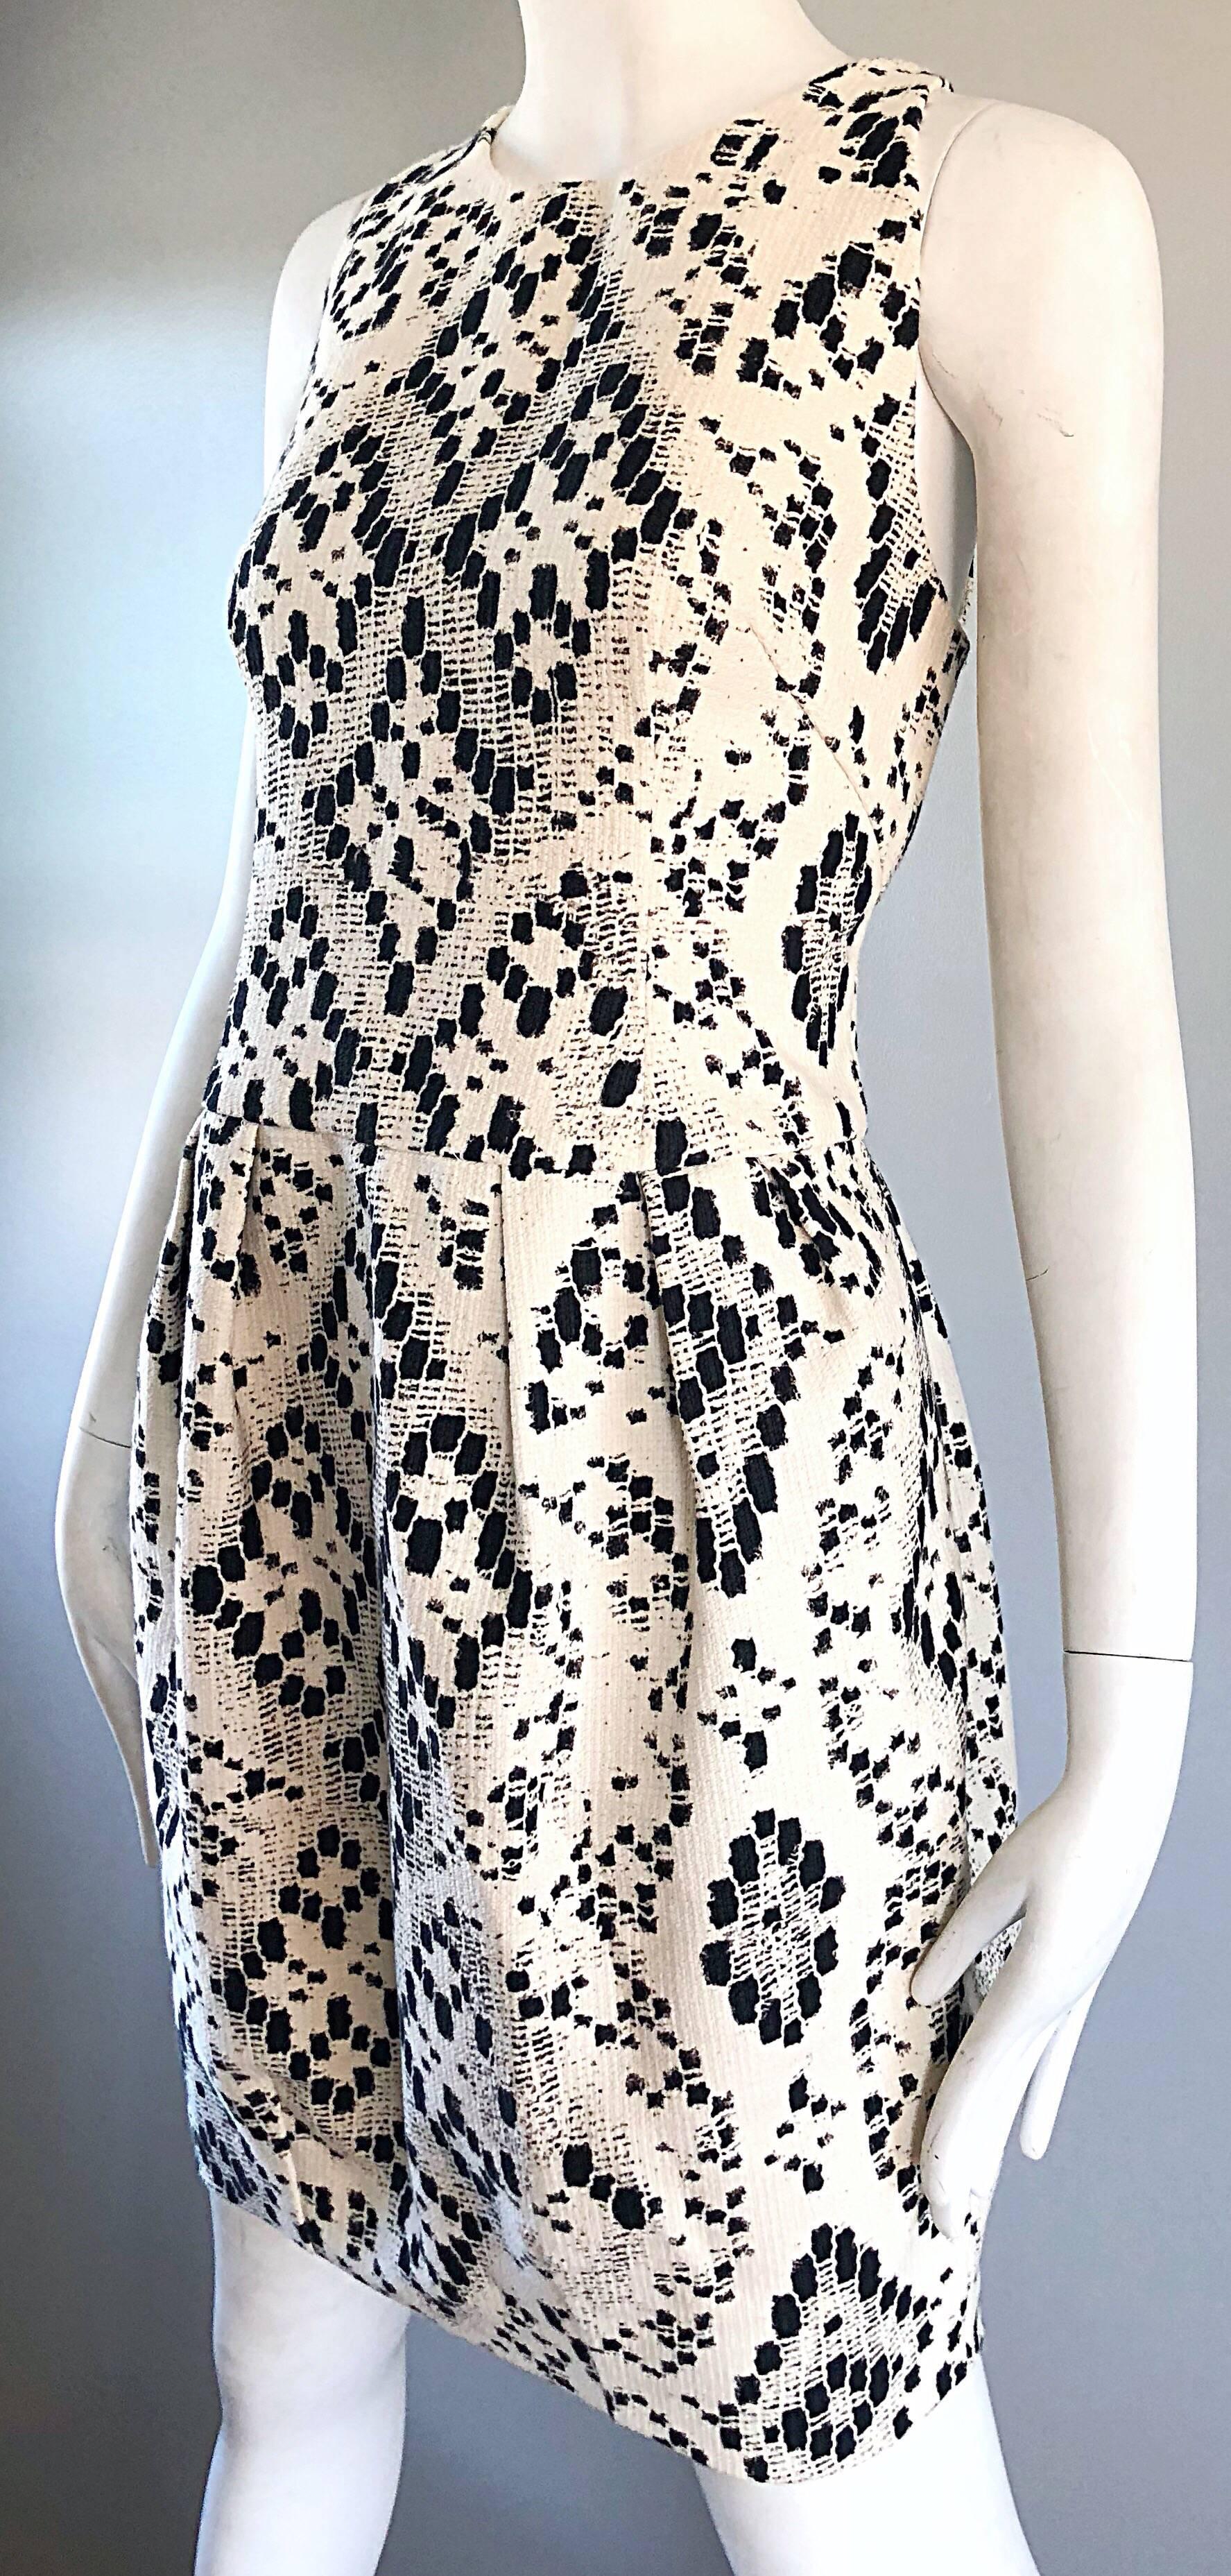 Giambattista Valli Size 10 12 Resort 2012 Black White Abstract Sleeveless Dress In Excellent Condition For Sale In San Diego, CA